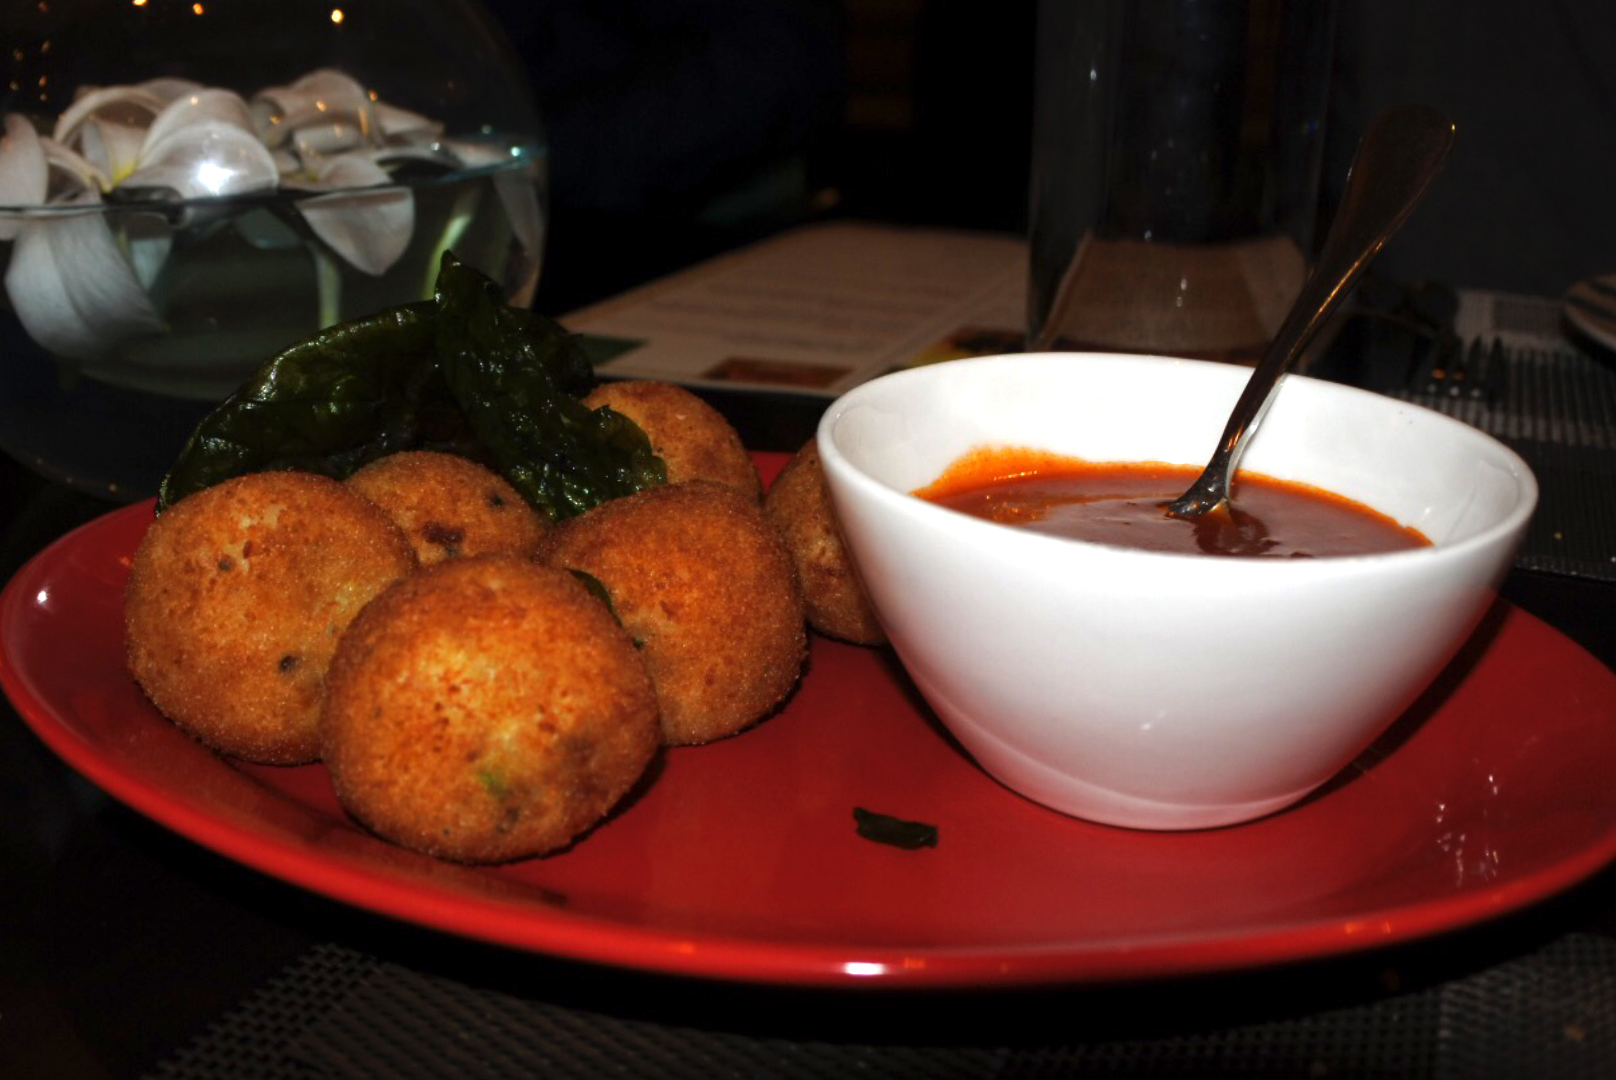 The fish cutlets accompanied by a spicy sauce